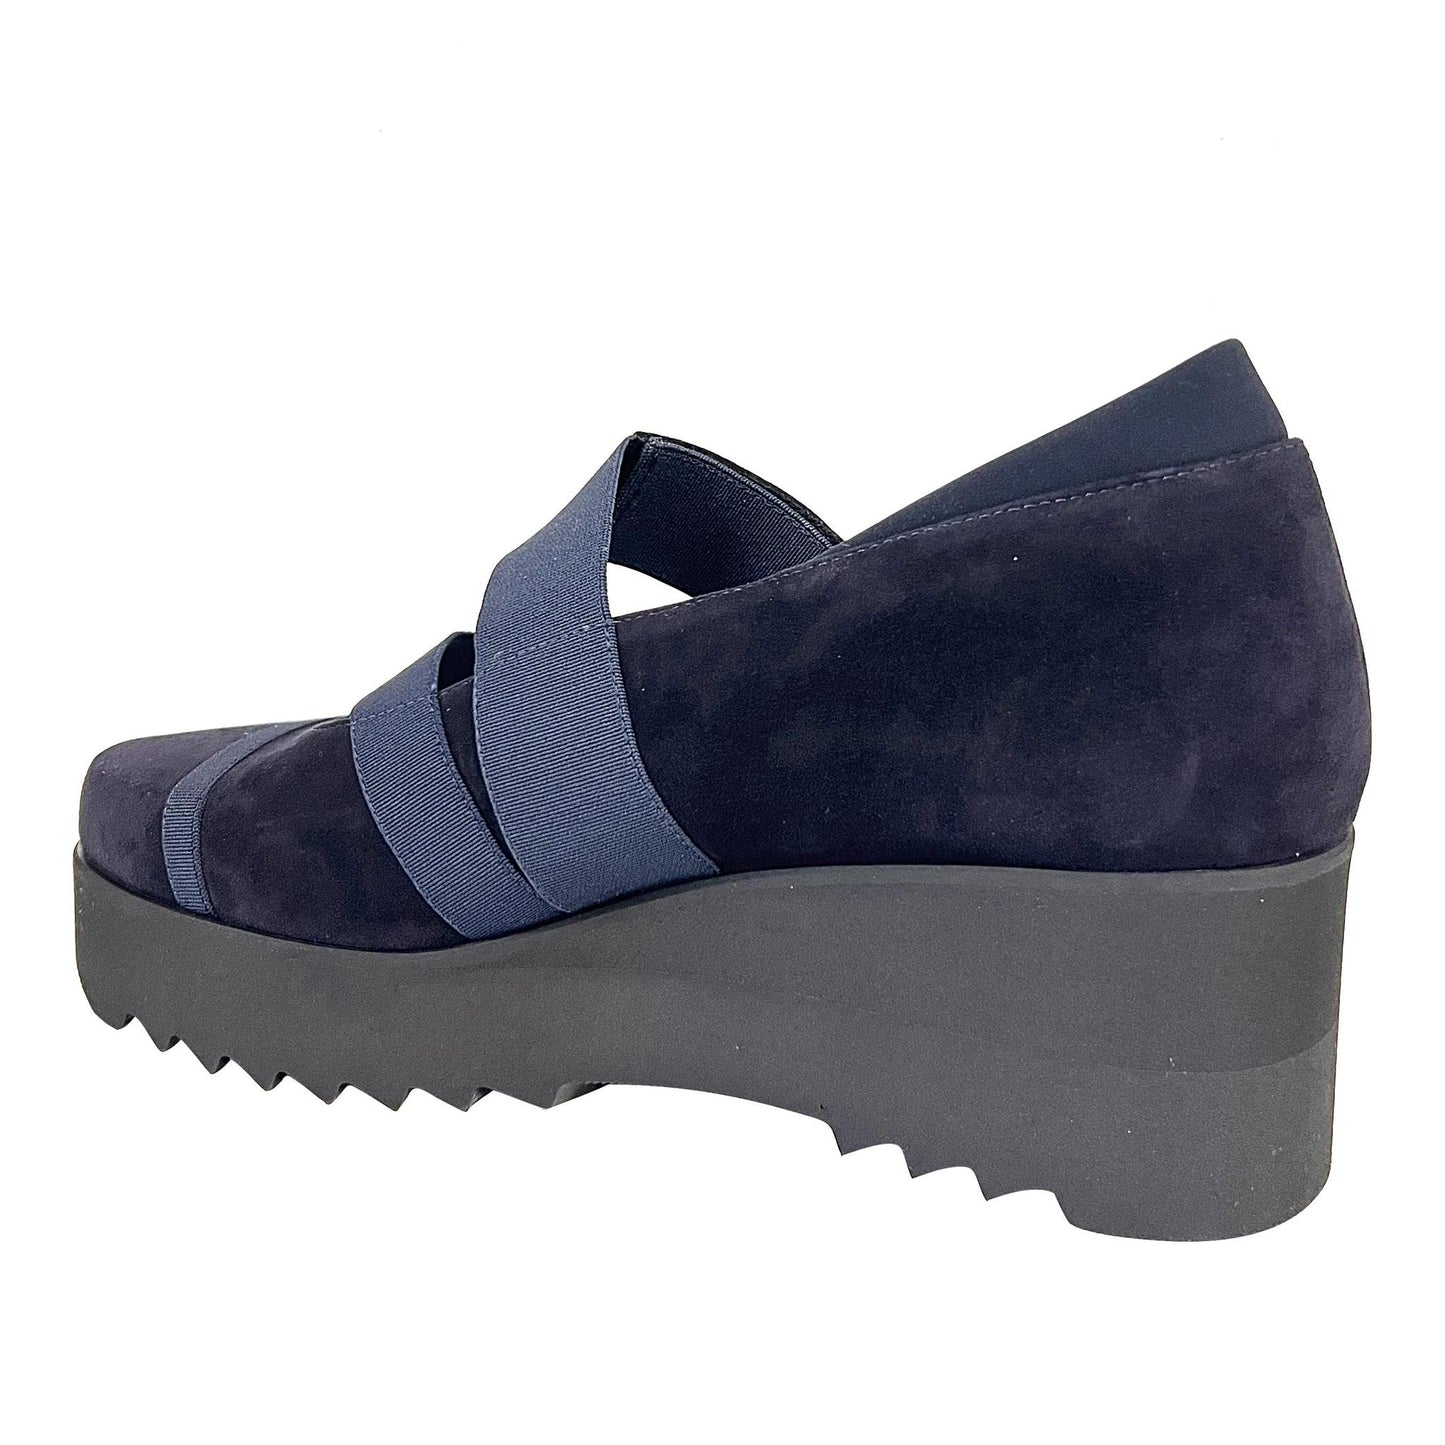 Darcy T by THIERRY RABOTIN Navy